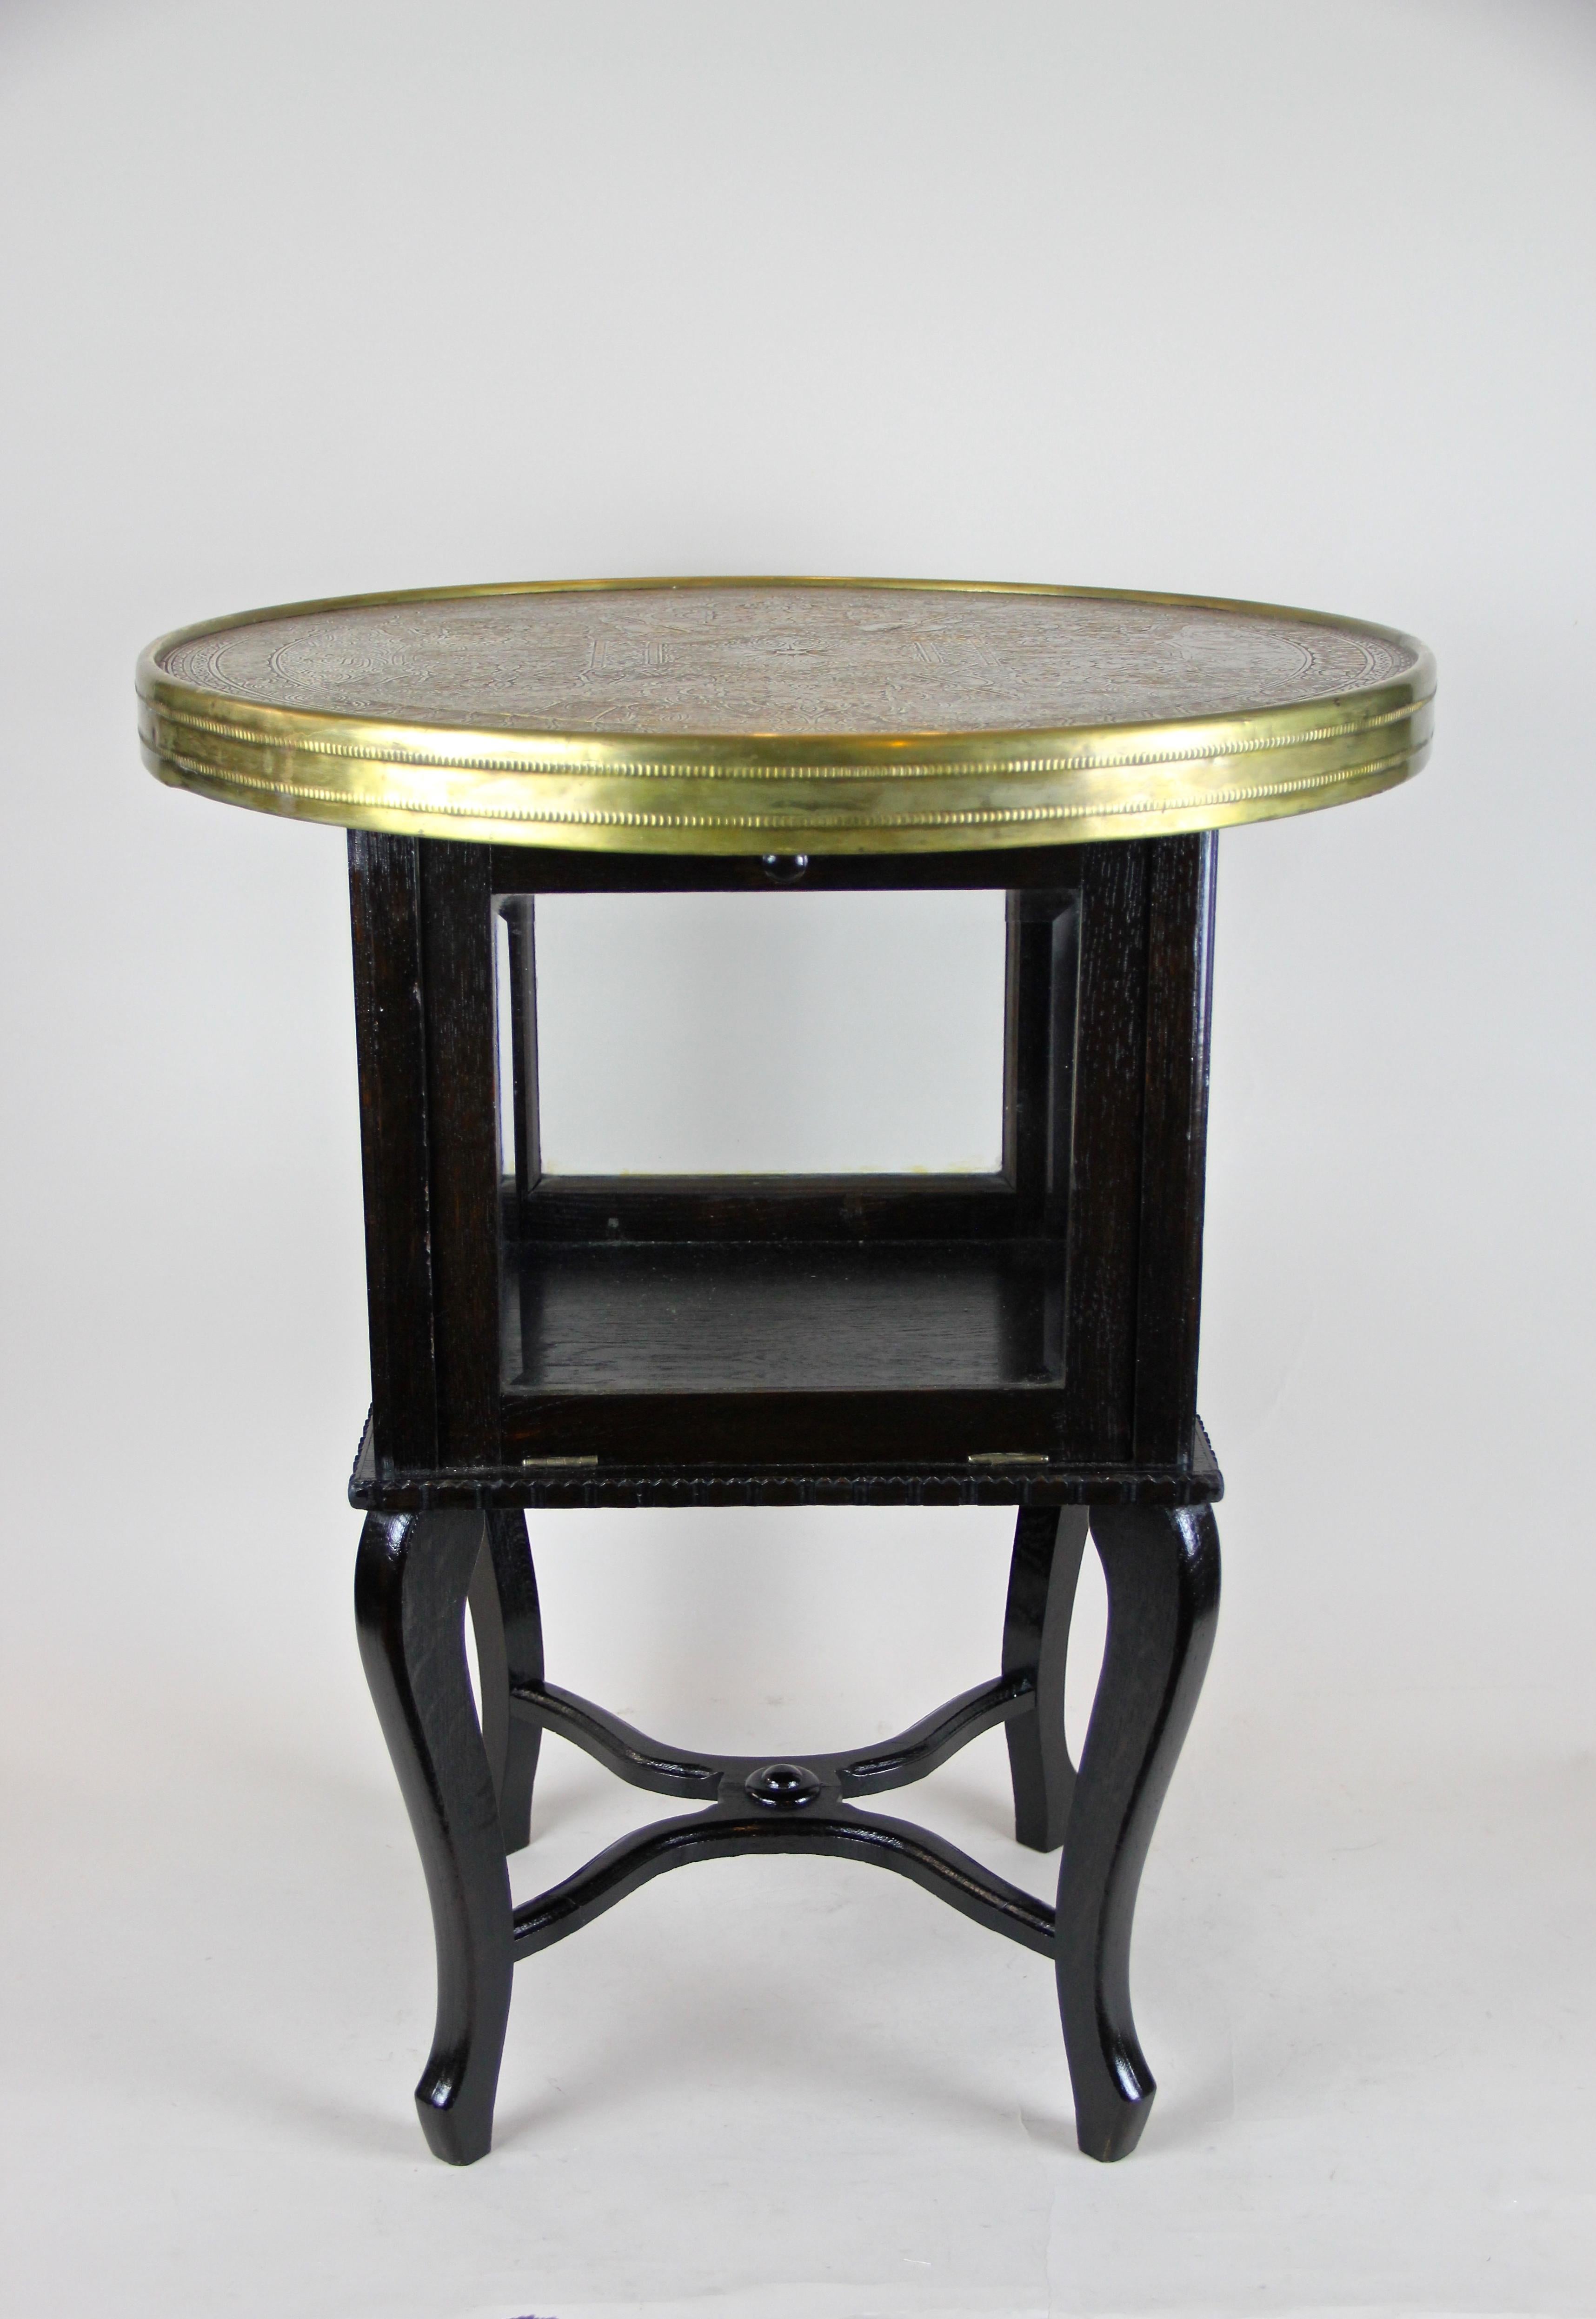 Austrian Art Deco Side Table with Ornamented Brass Table Top, Austria, circa 1920